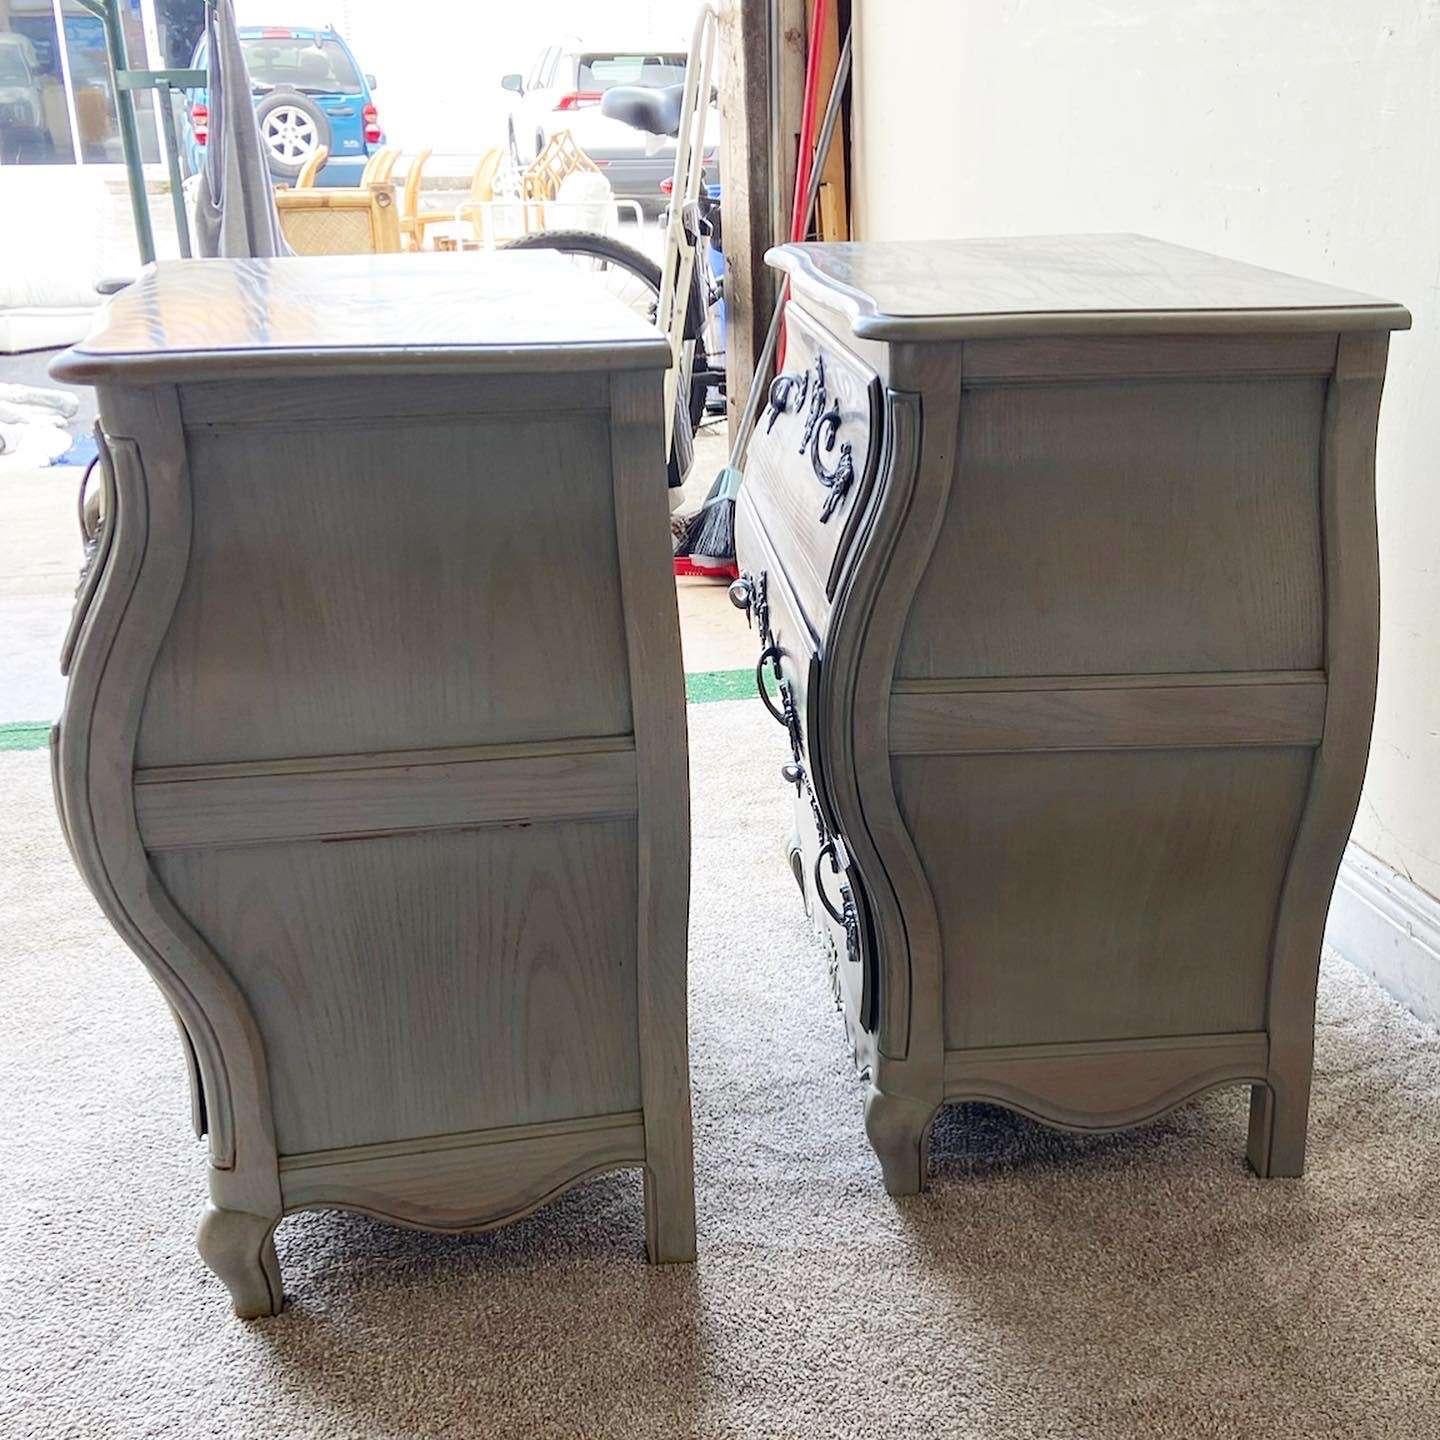 Vintage French Provincial Louis Xv Style Bombé Commodes by Baker - a Pair For Sale 1